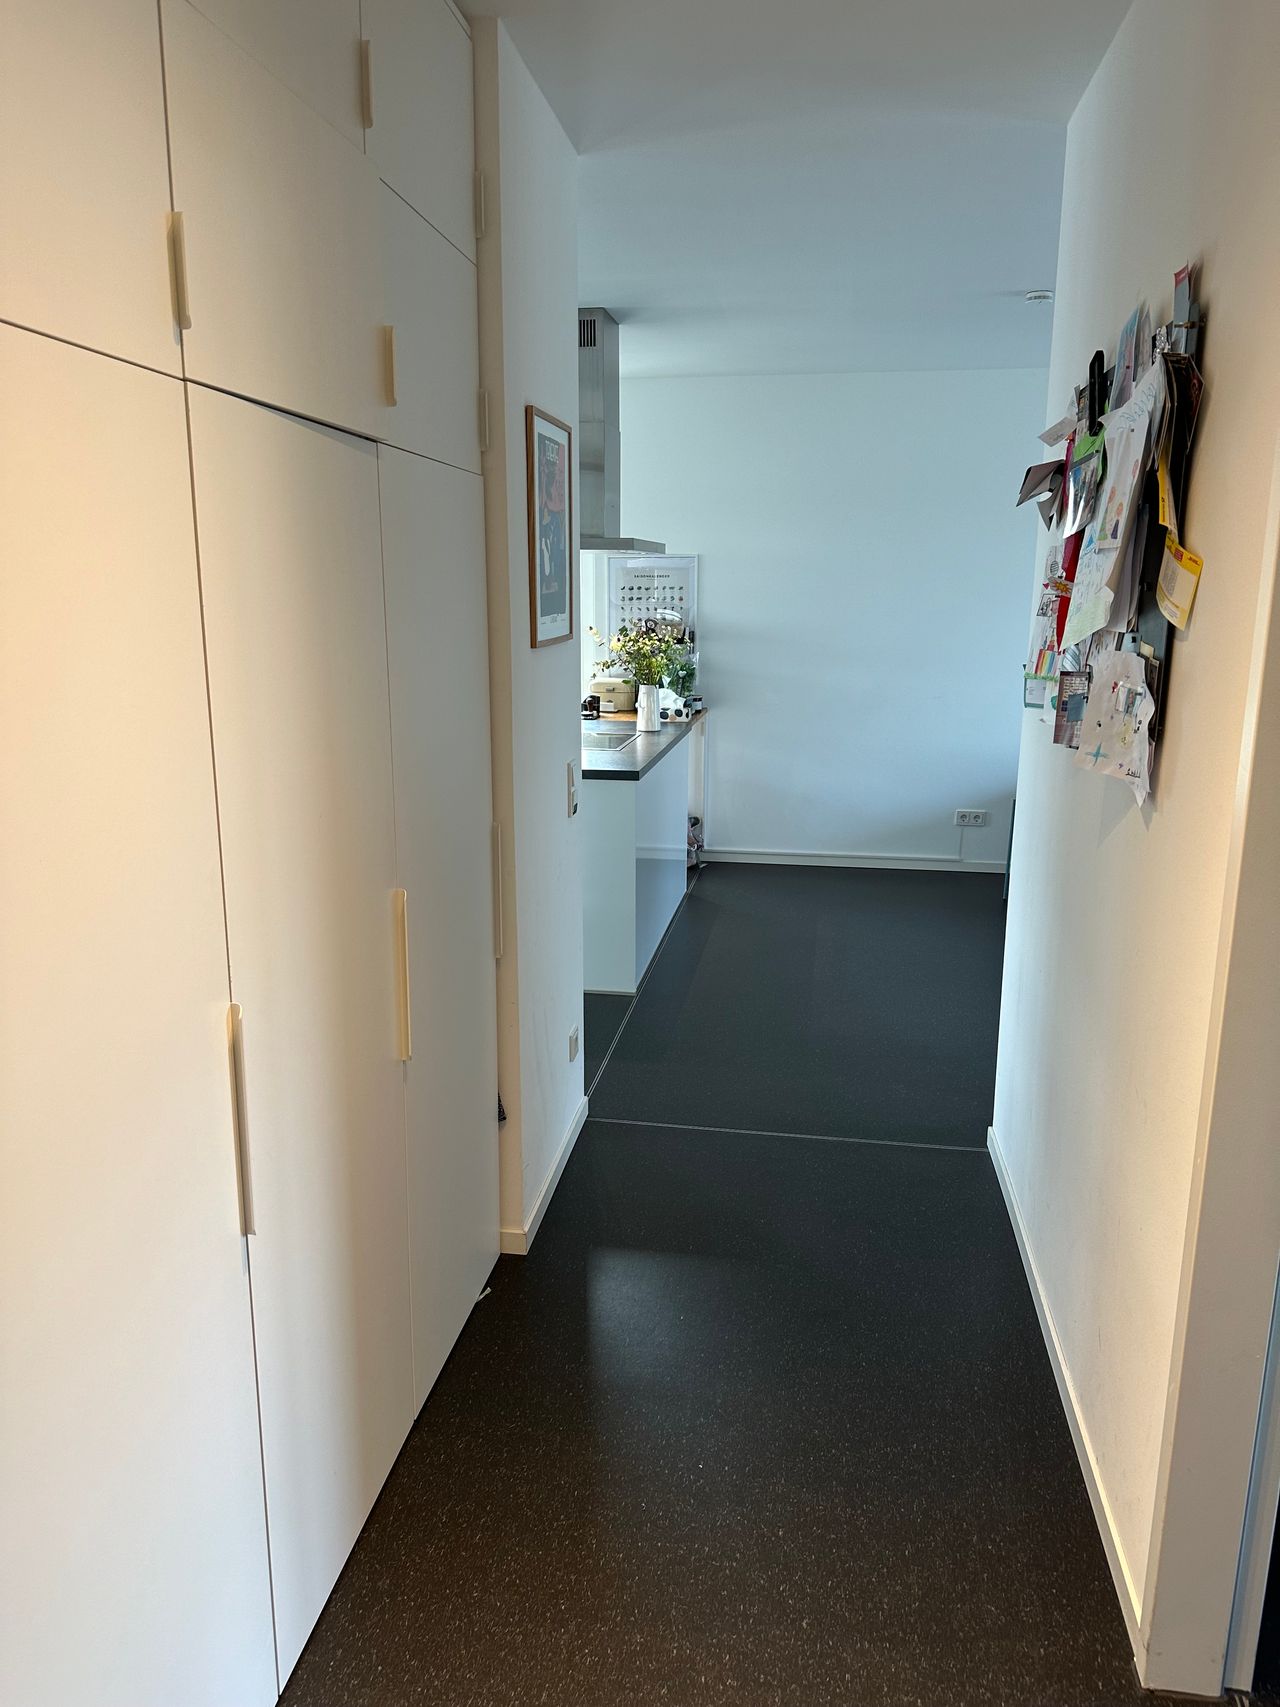 3 bedroom apartment (4 rooms) with community garden and terrace in Berlin-Pankow perfect for families (Furnished All Inclusive)